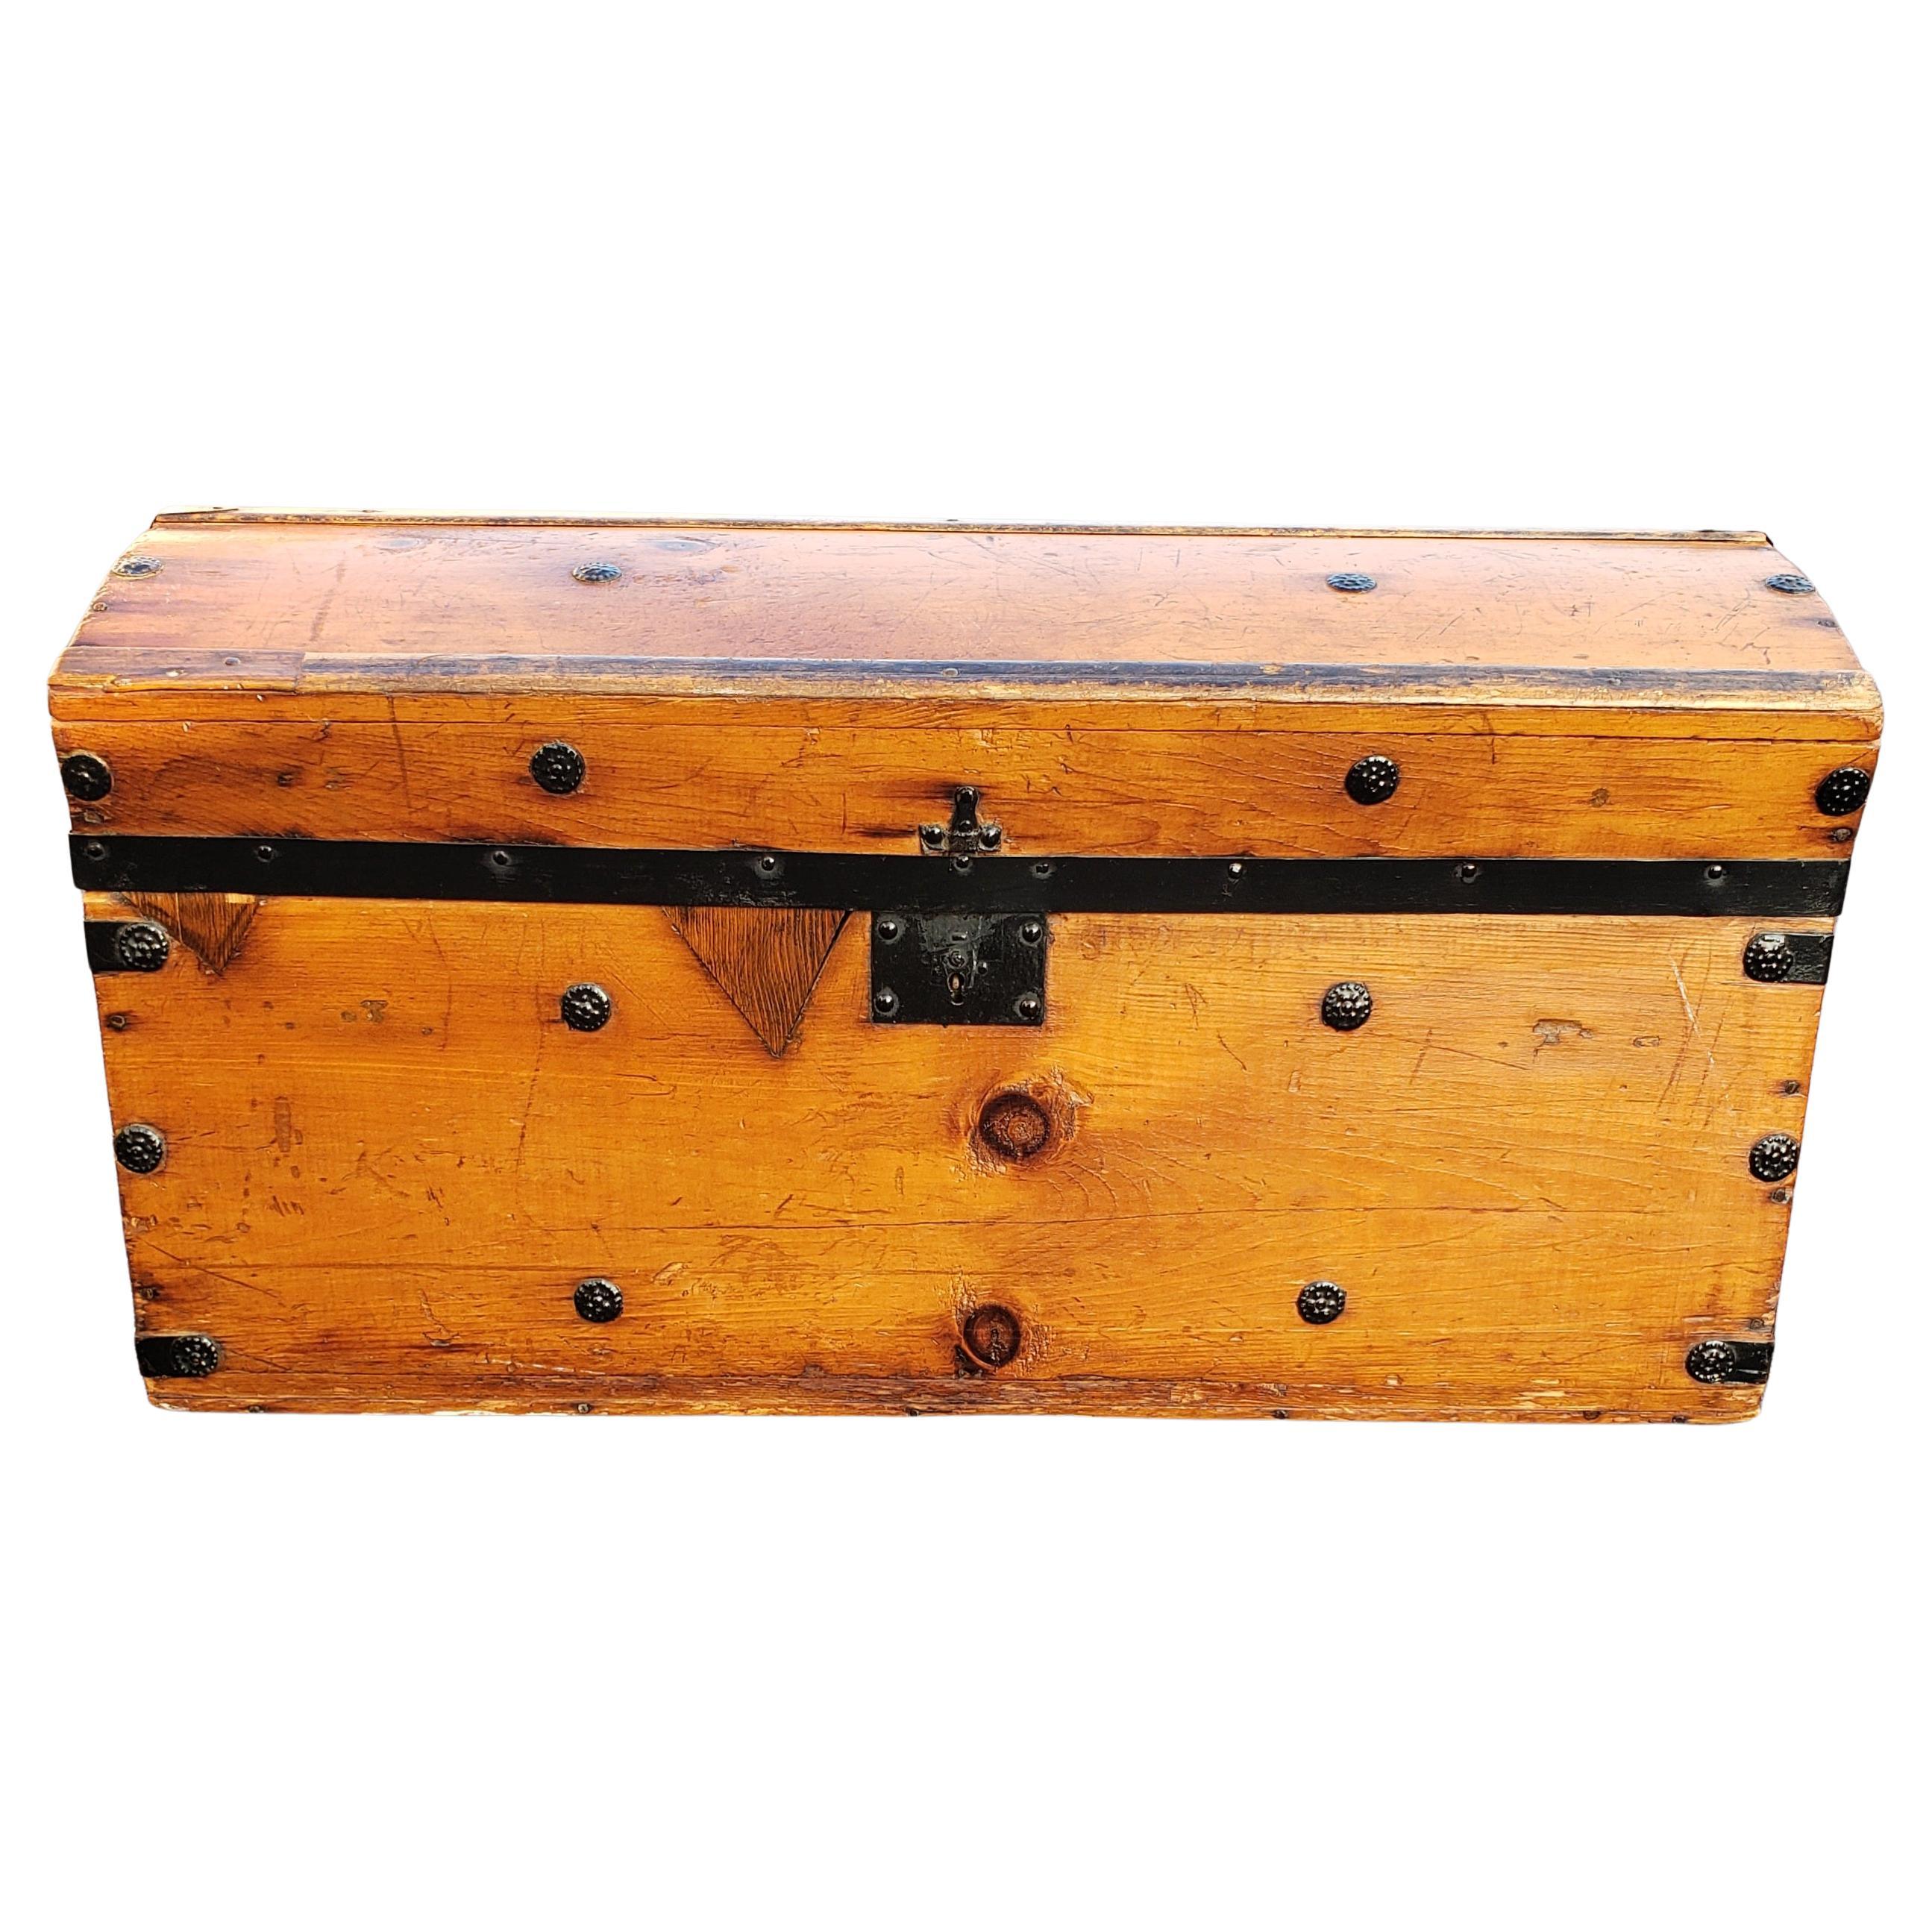 Vintage American Pine Trunk with Solid Wooden Handles, circa 1960s In Good Condition For Sale In Germantown, MD